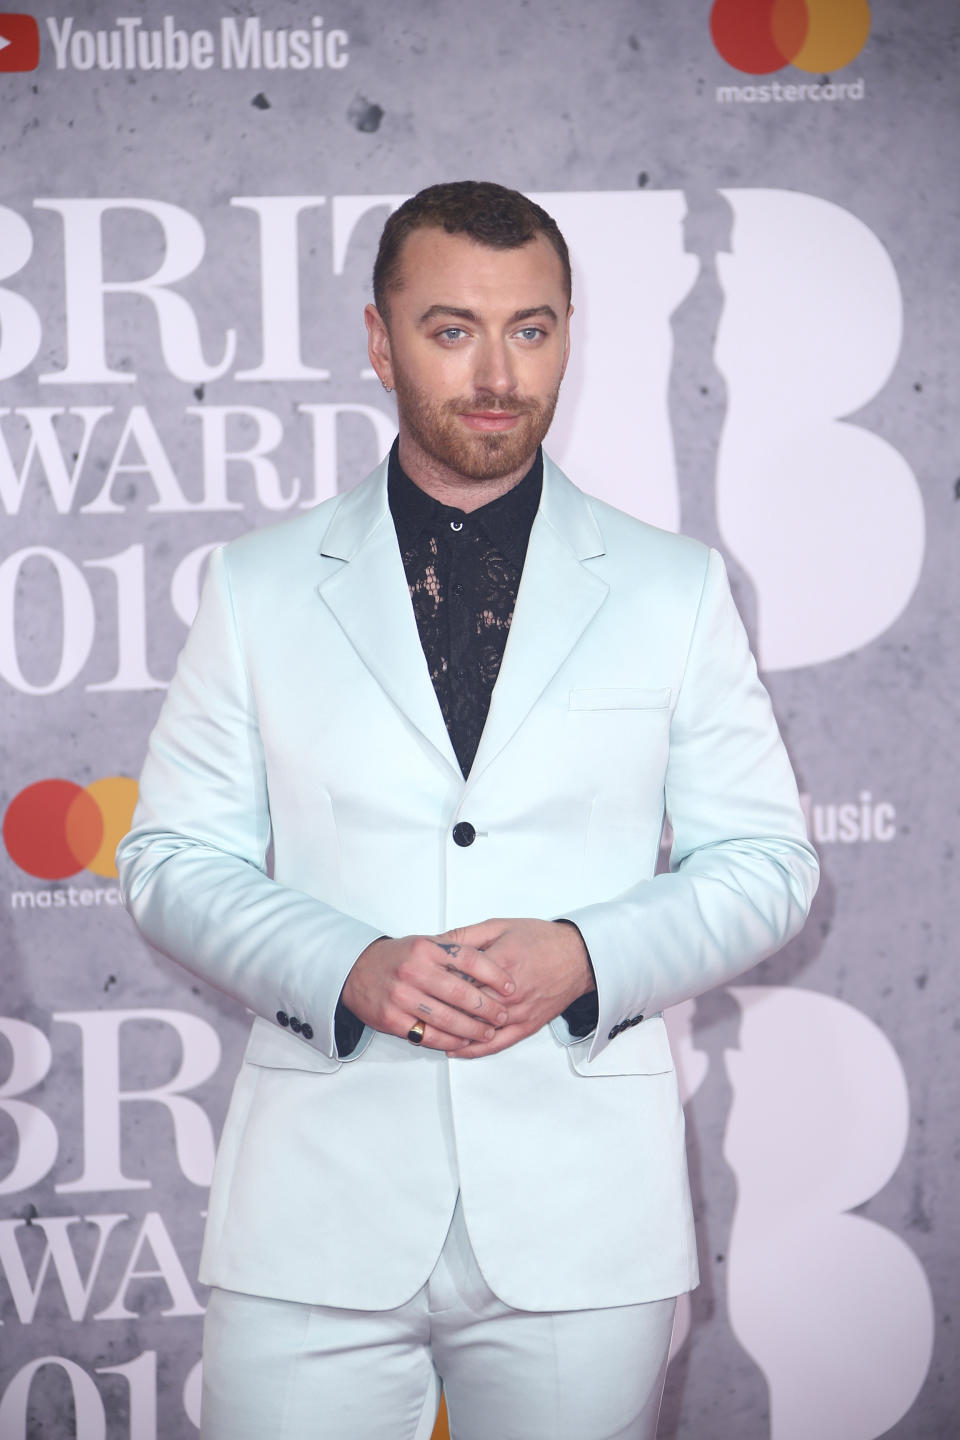 Singer Sam Smith poses for photographers upon arrival at the Brit Awards in London, Wednesday, Feb. 20, 2019. (Photo by Joel C Ryan/Invision/AP)